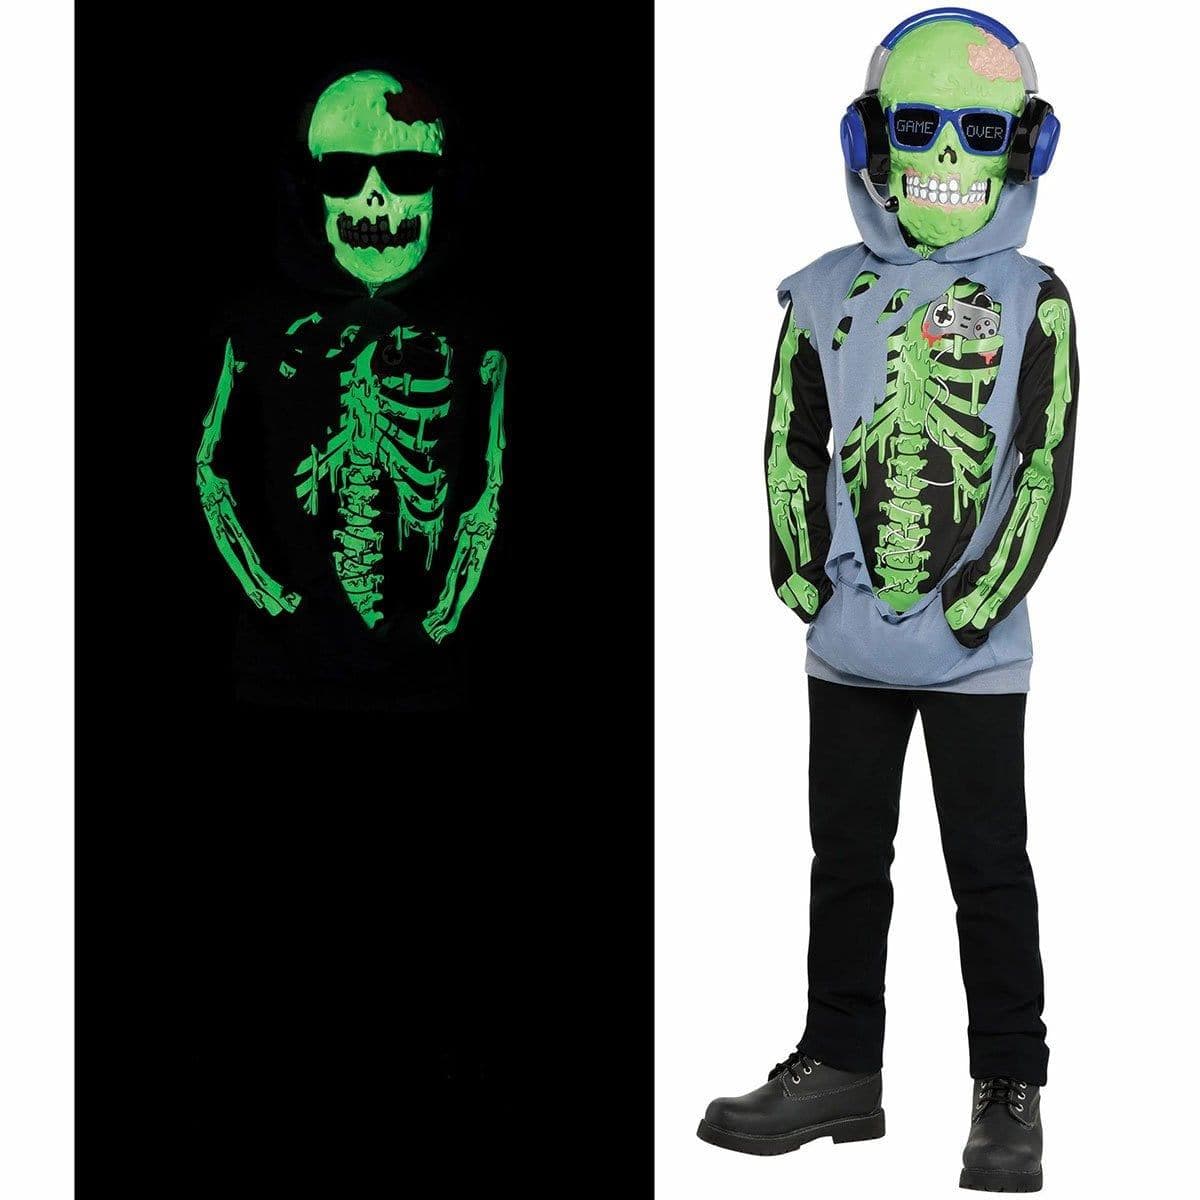 Buy Costumes Zombie Gamer Costume for Kids sold at Party Expert